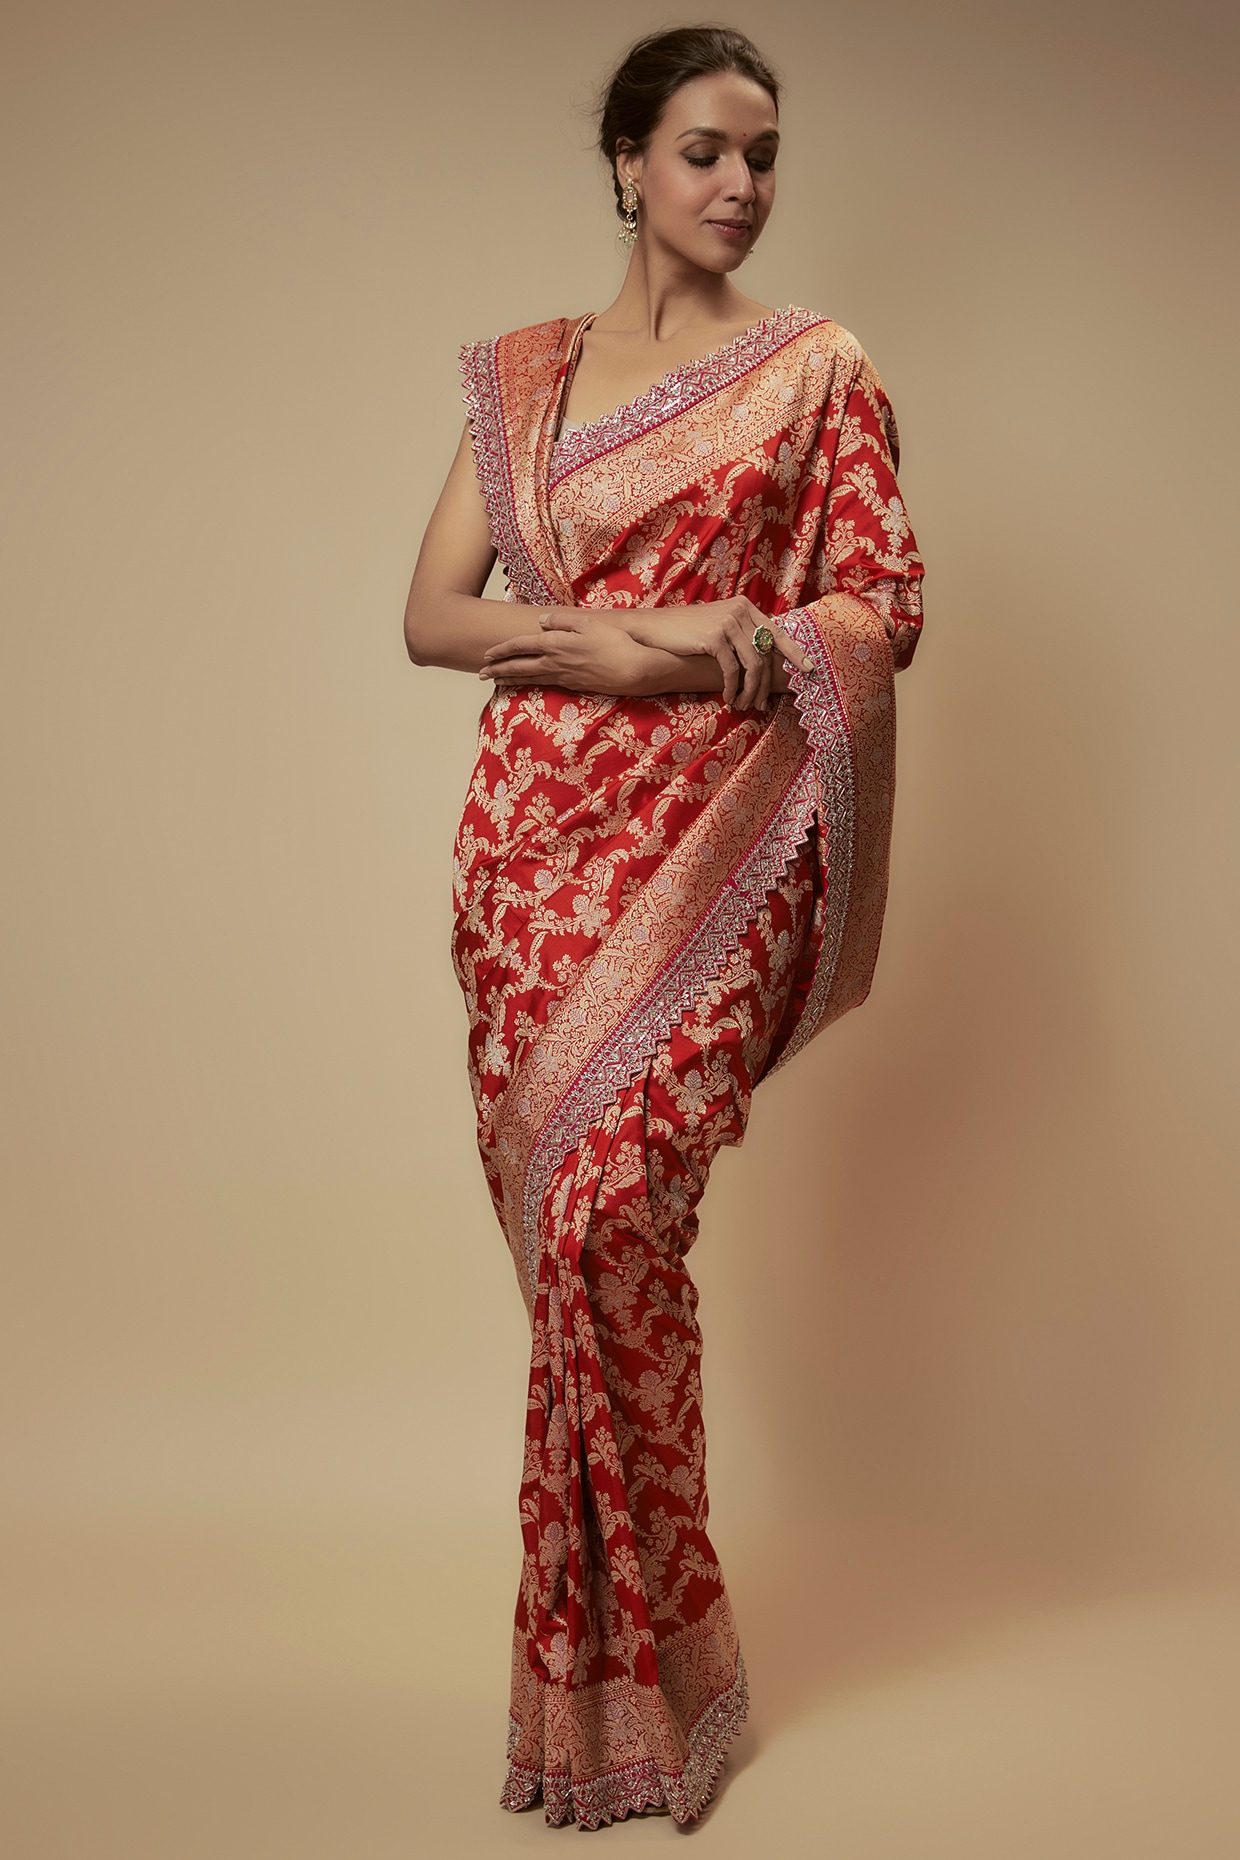 Discover more than 225 white saree with maroon border latest